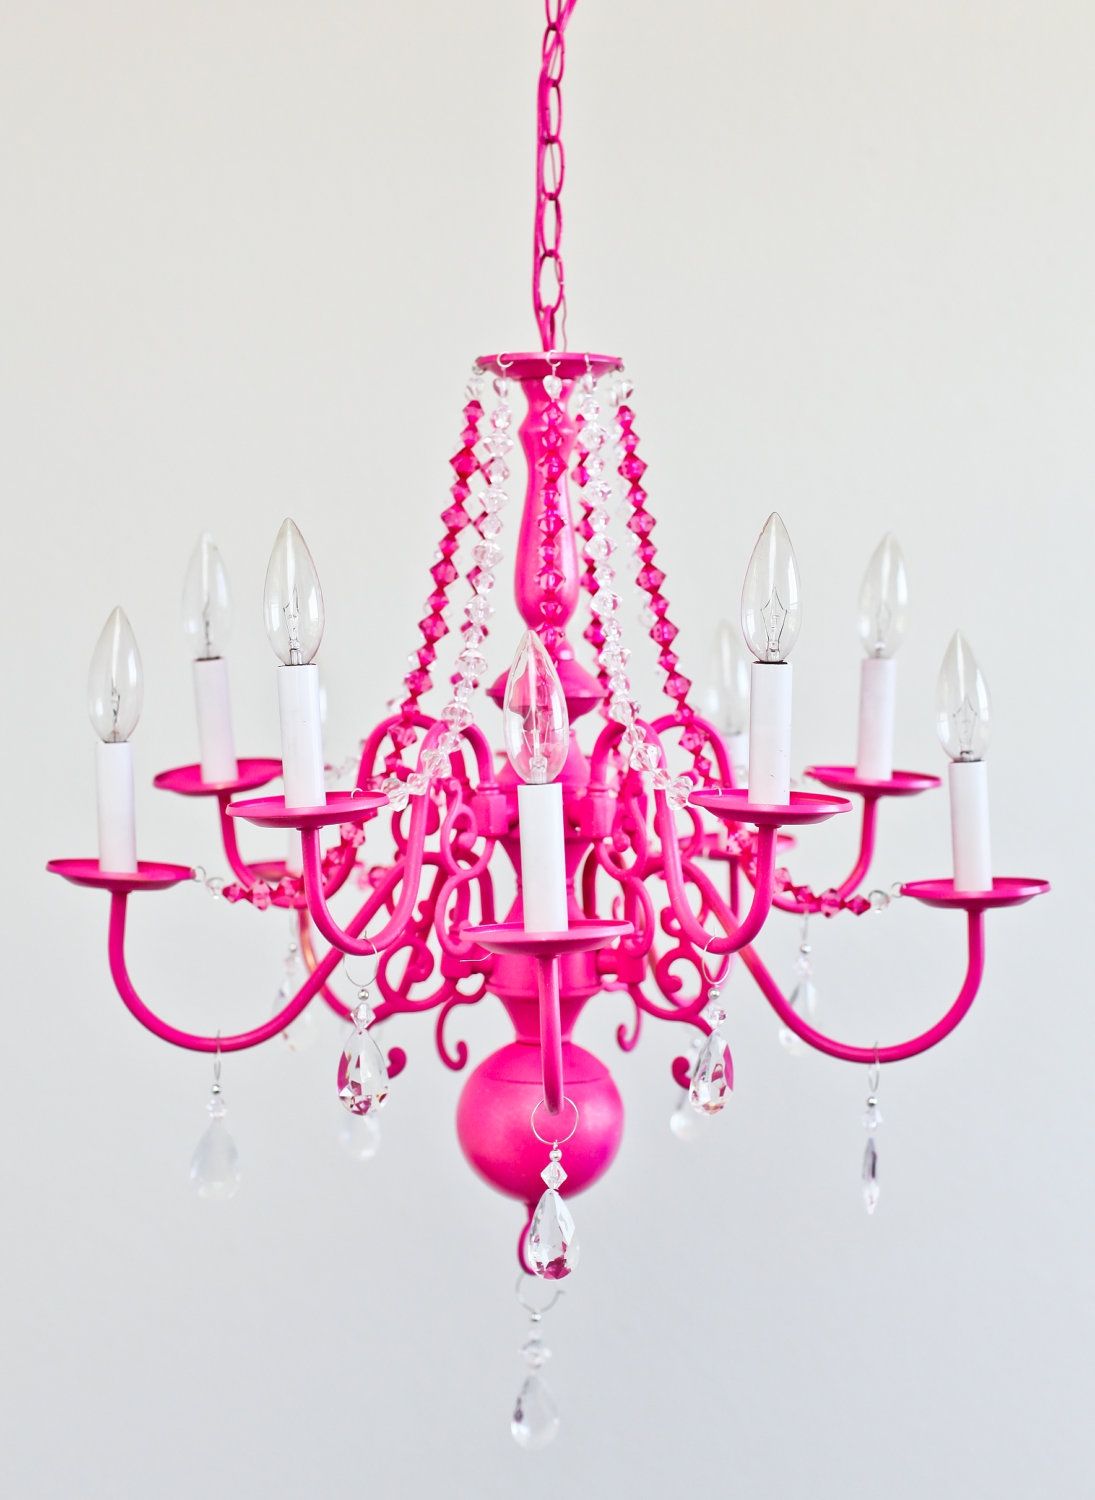 Victorian Mod Custom Chandeliers In Any Color Pink Aqua Blue Regarding Turquoise And Pink Chandeliers (View 6 of 25)